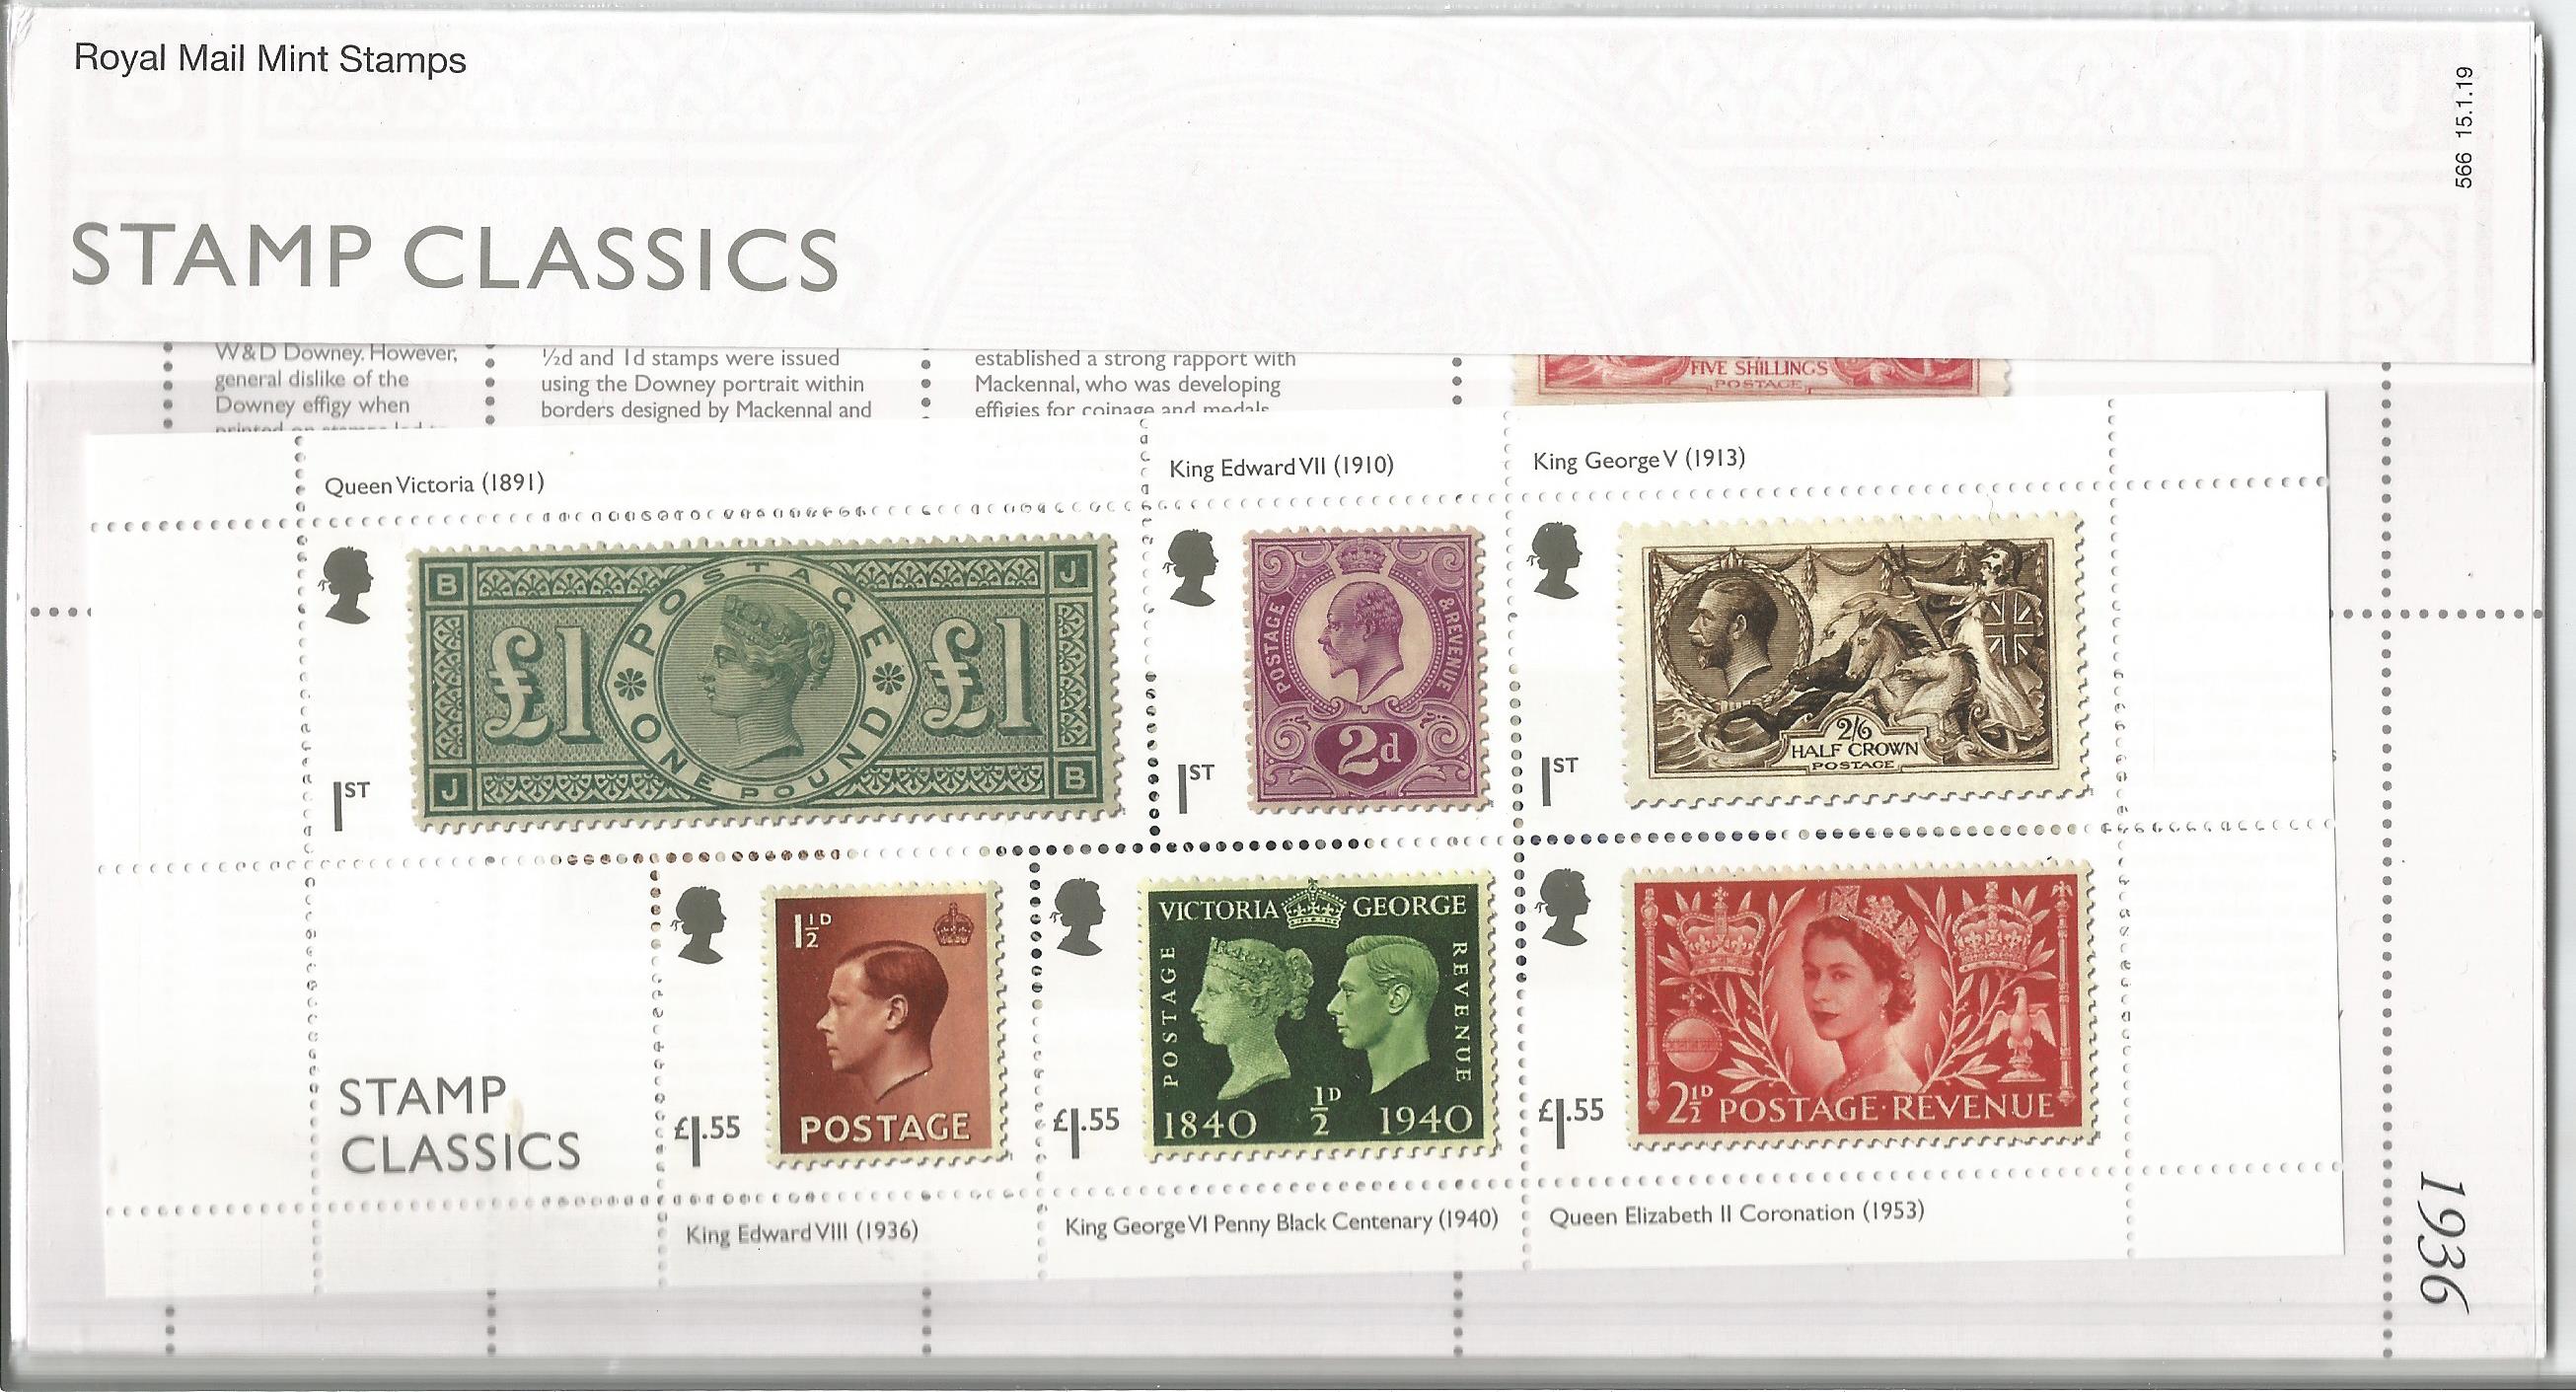 GB mint stamps Presentation Pack no 566 Stamp Classics 2019. Good condition. We combine postage on